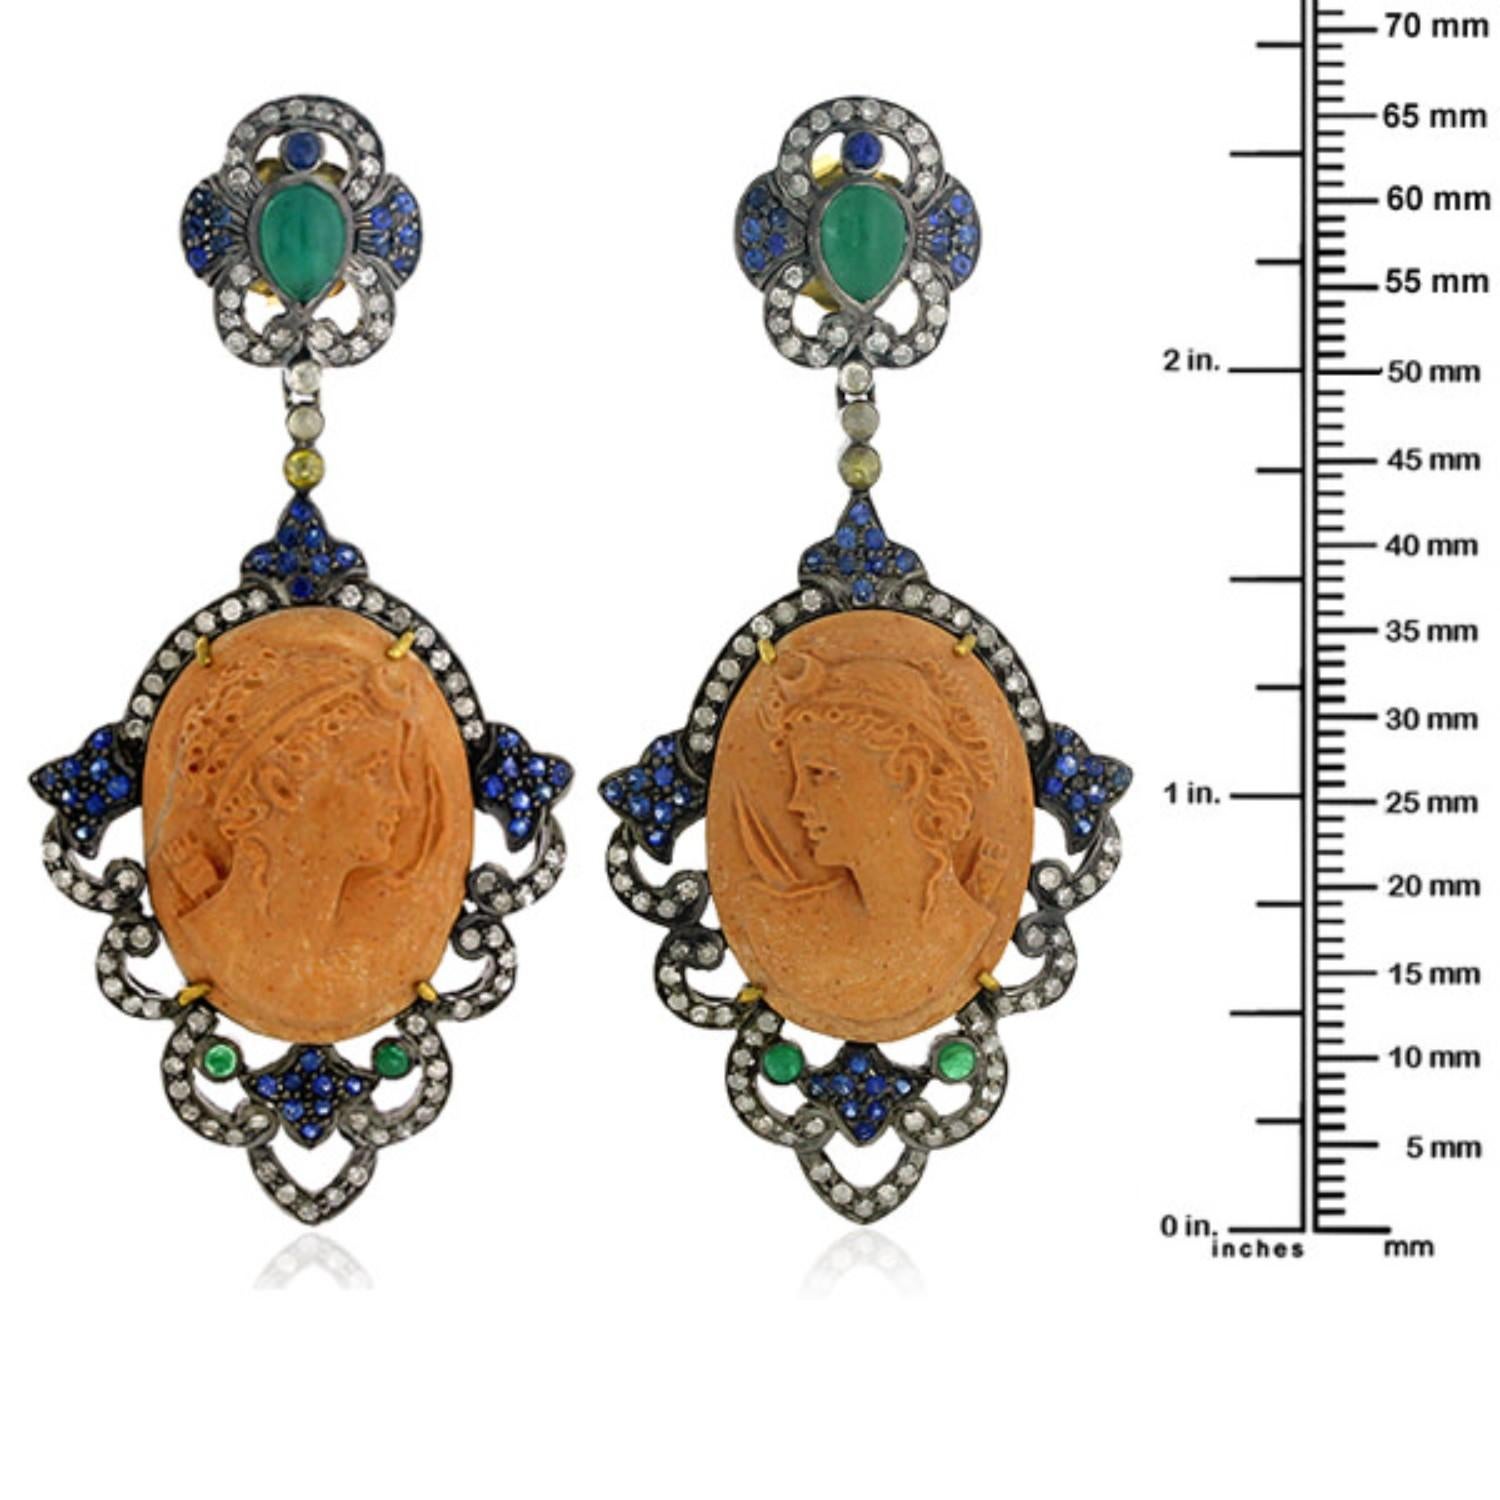 Mixed Cut Carved Shell Cameo Earrings With Emeralds Surrounded By Pave Sapphire & Diamonds For Sale